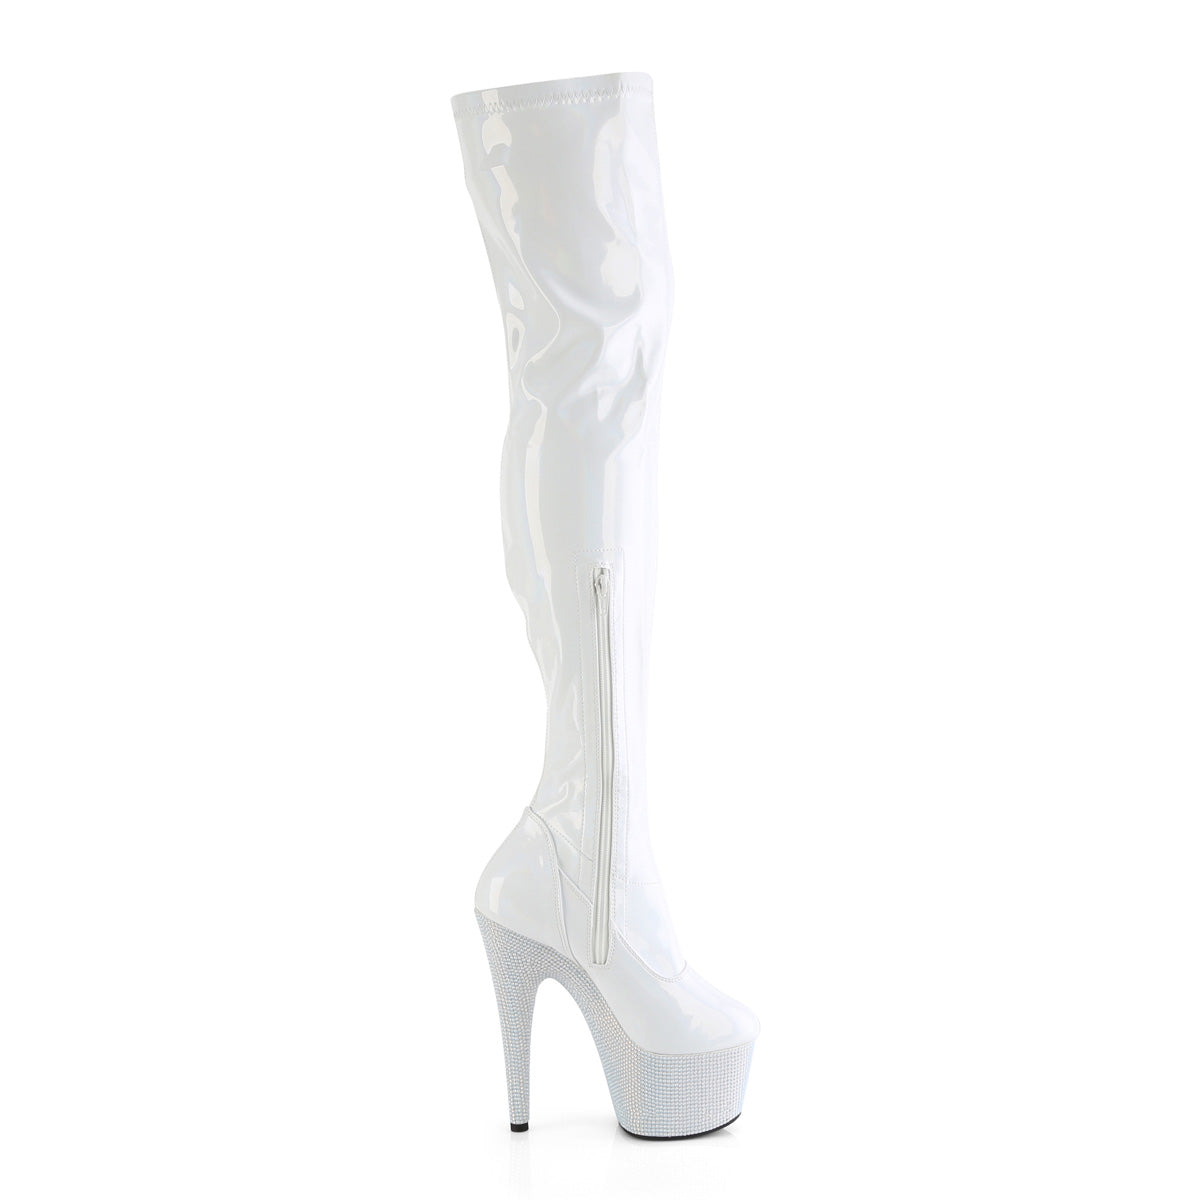 7 Inch Heel BEJEWELED-3000-7 White Stretch Holo